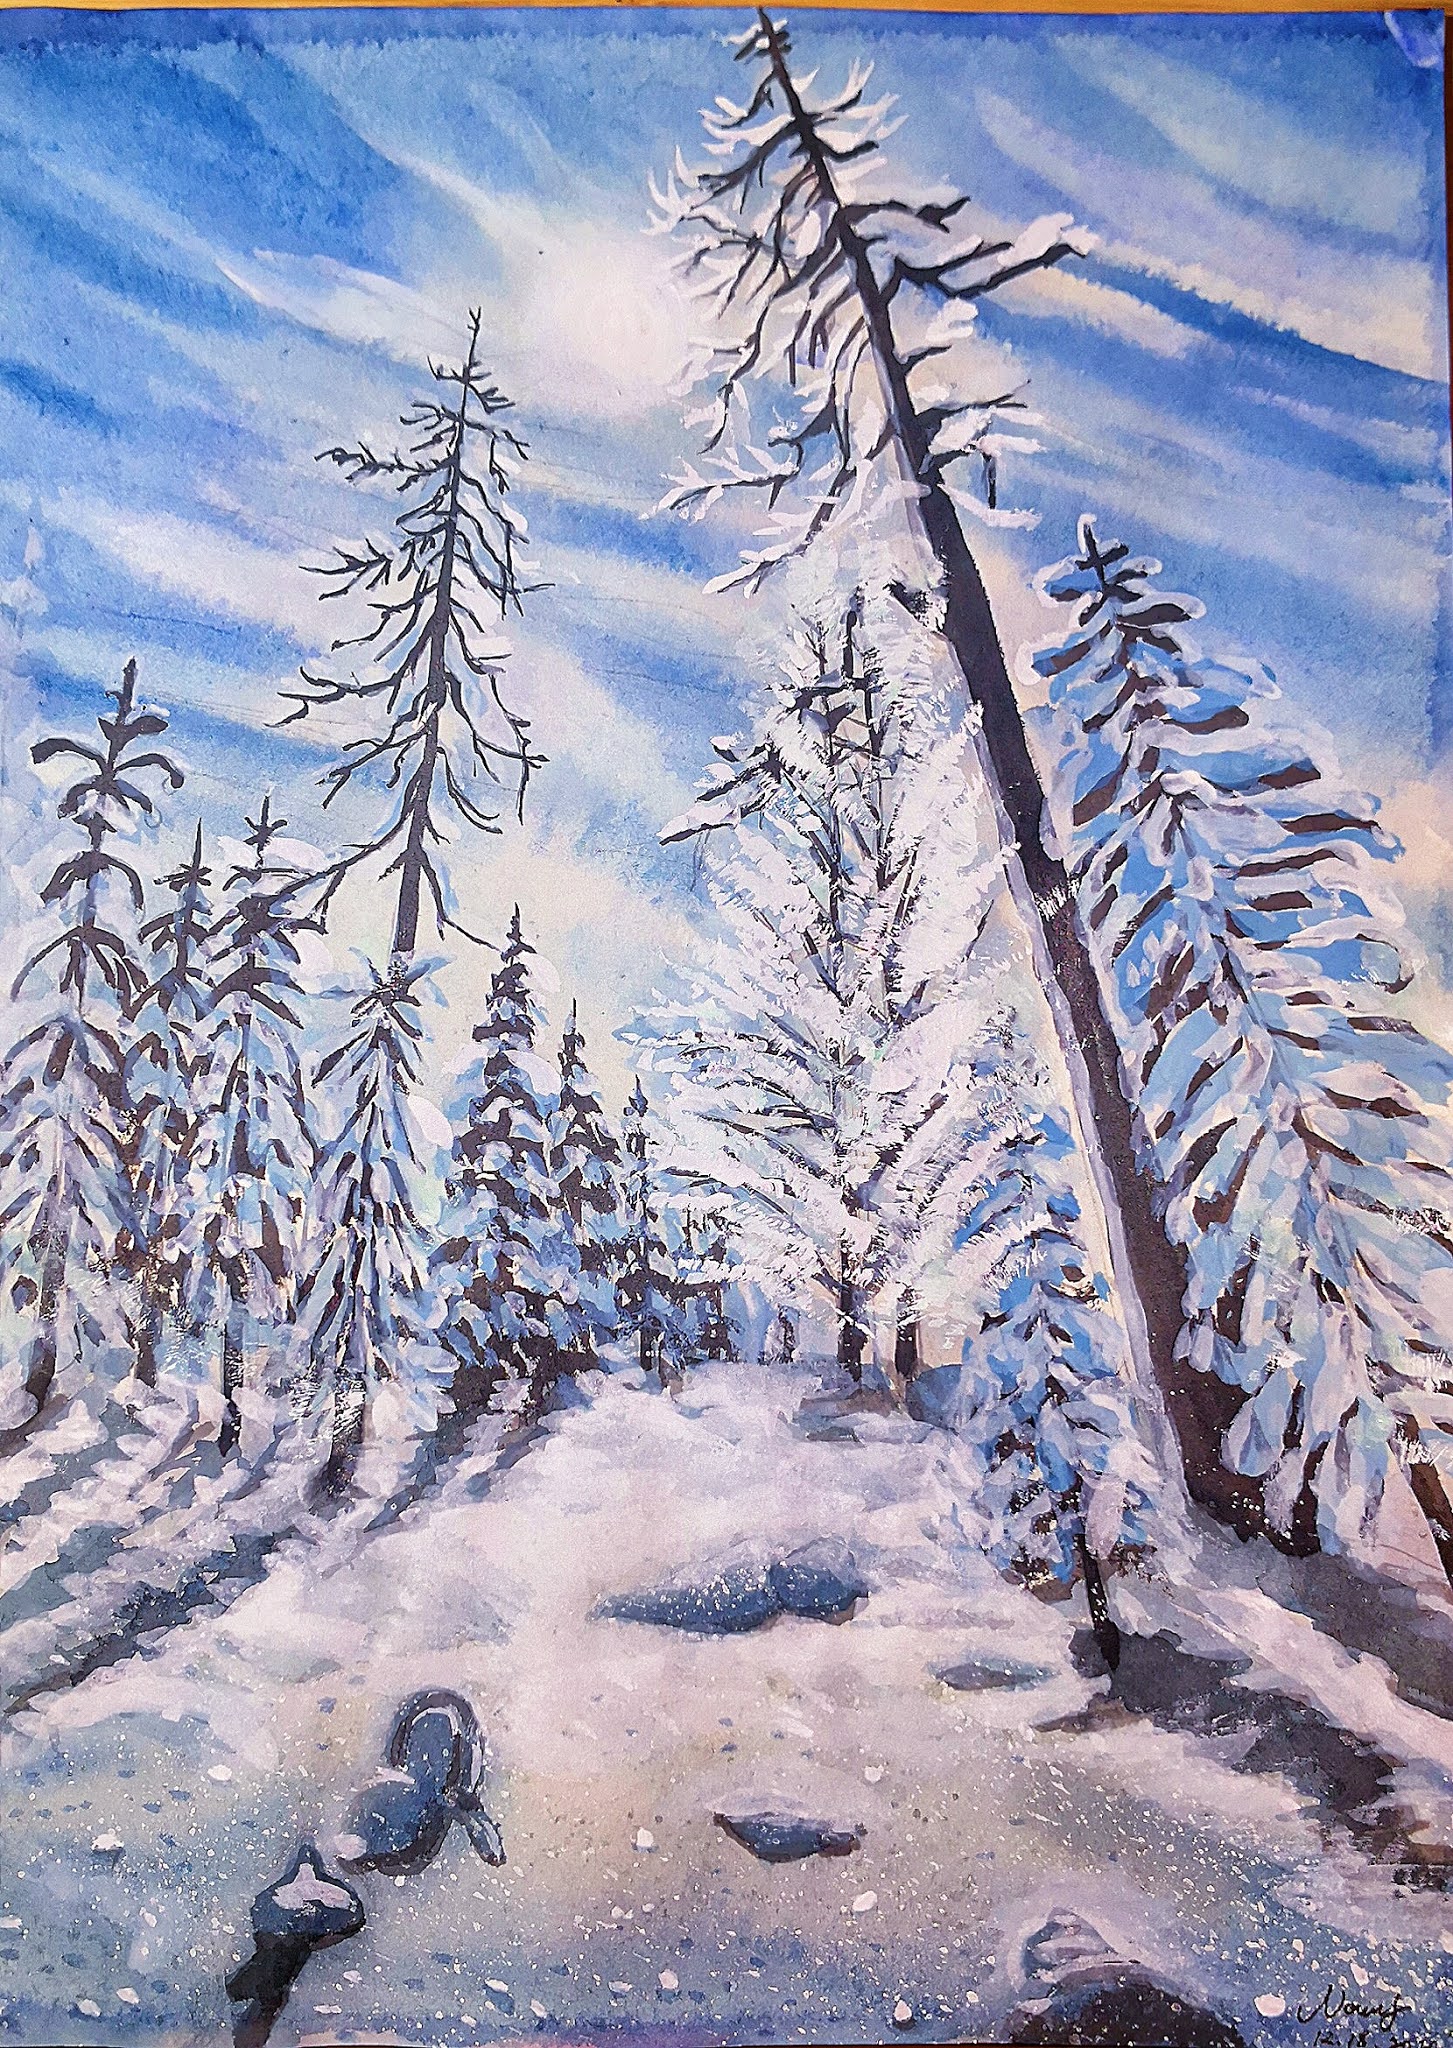 How to draw winter snowing forest landscape tutorial step by step